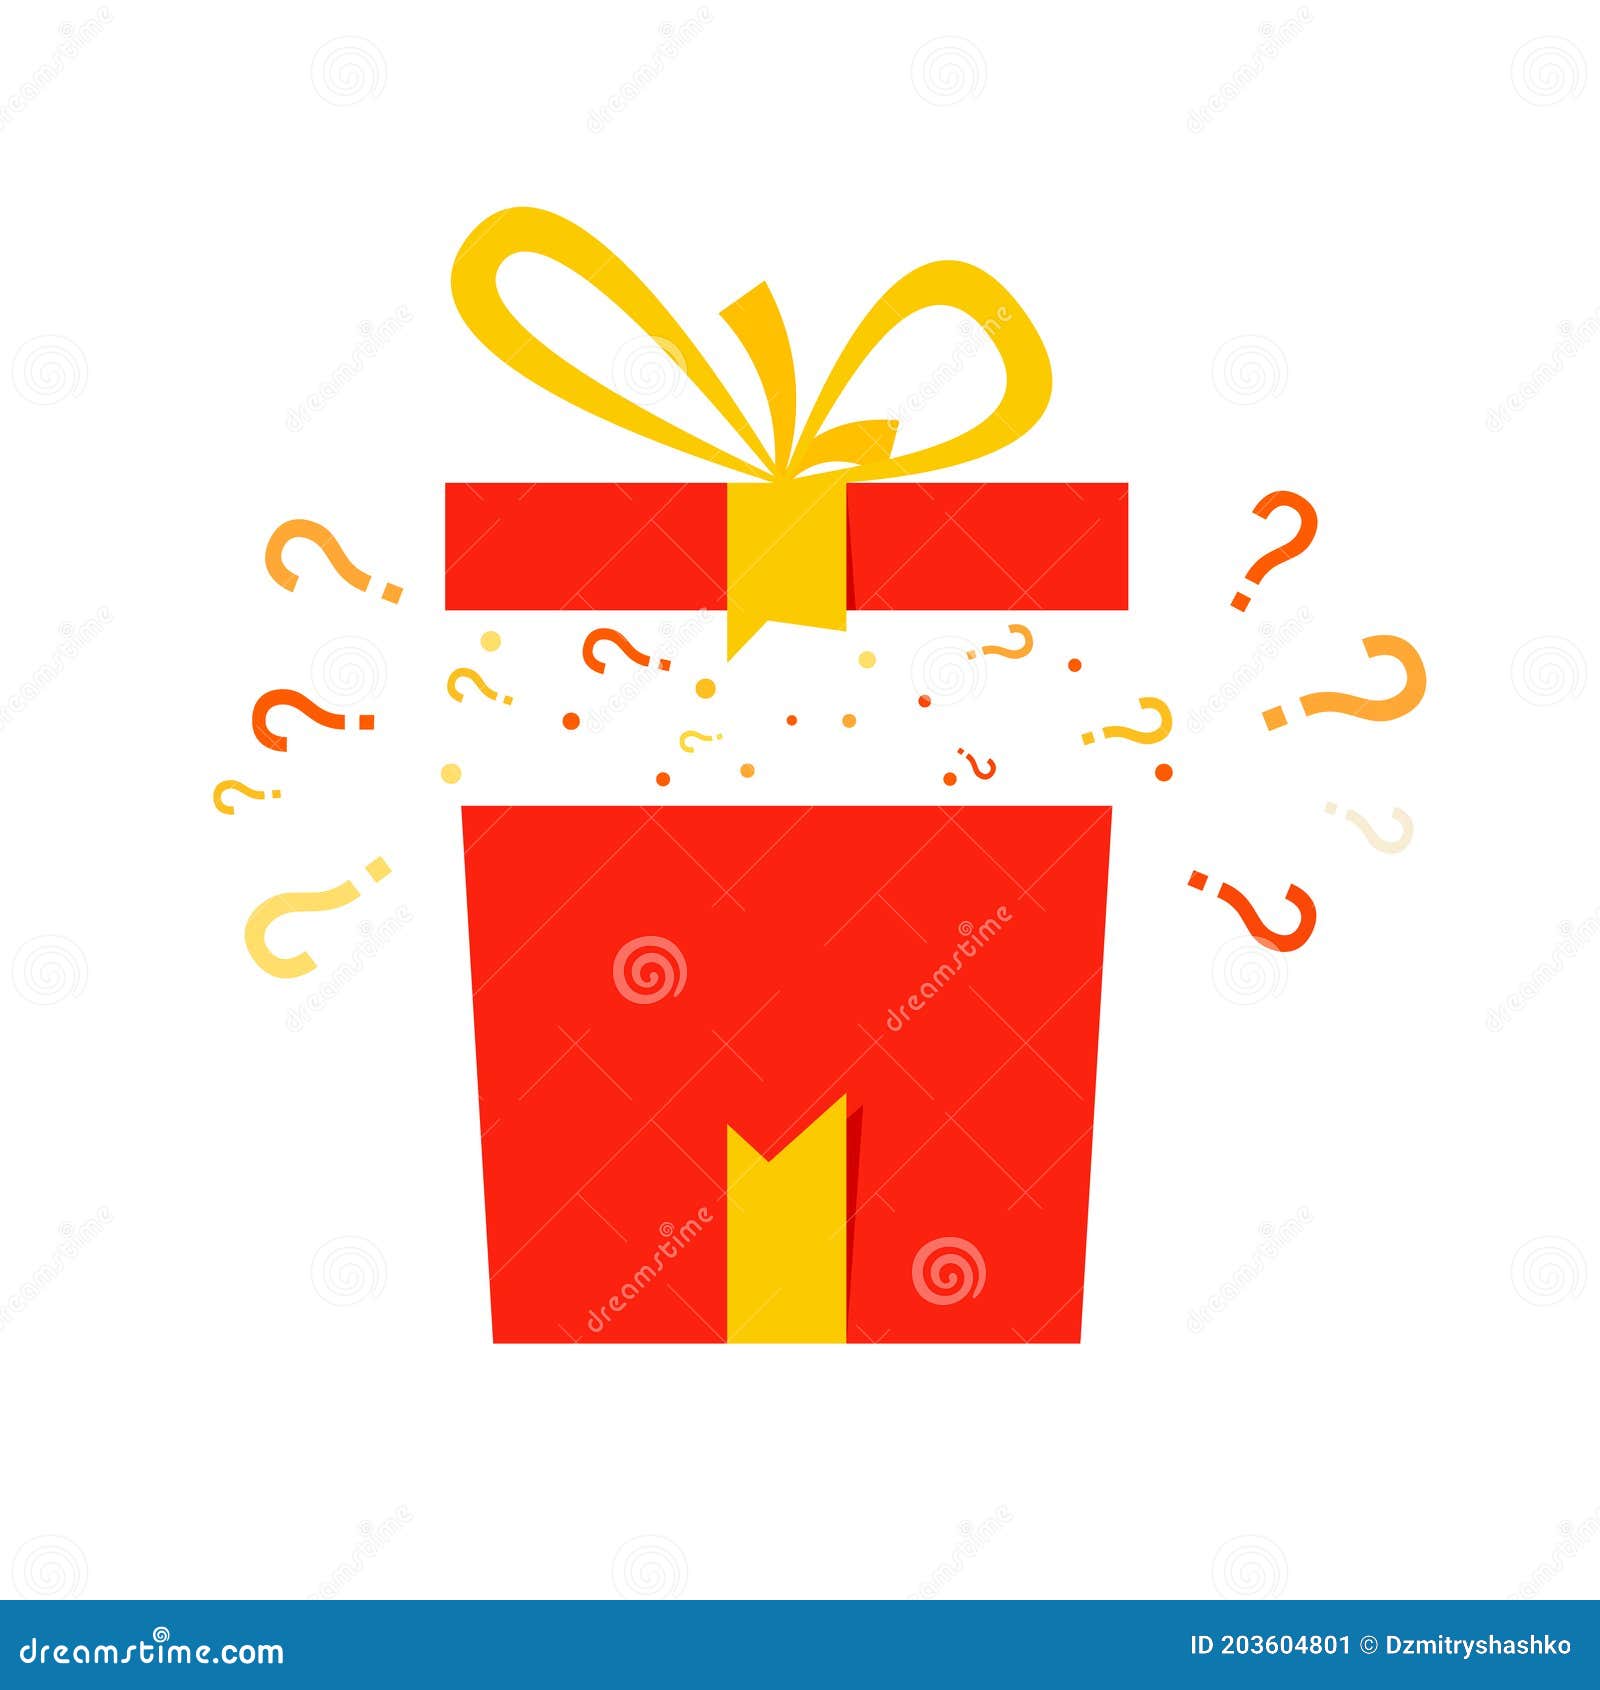 mystery prize gift box icon